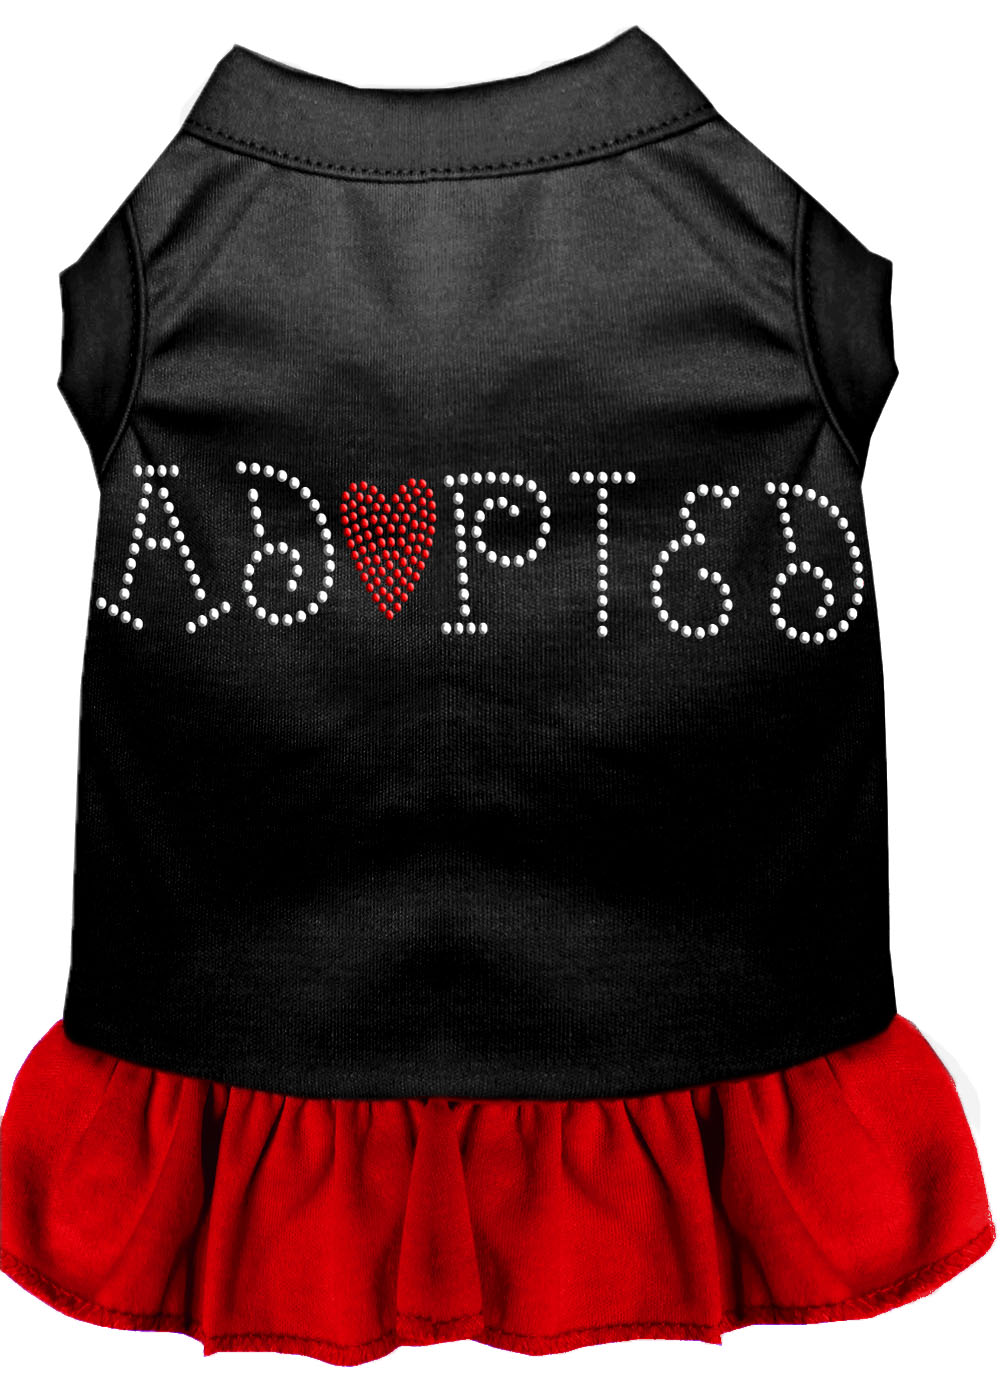 Adopted Rhinestone Dresses Black with Red XXXL